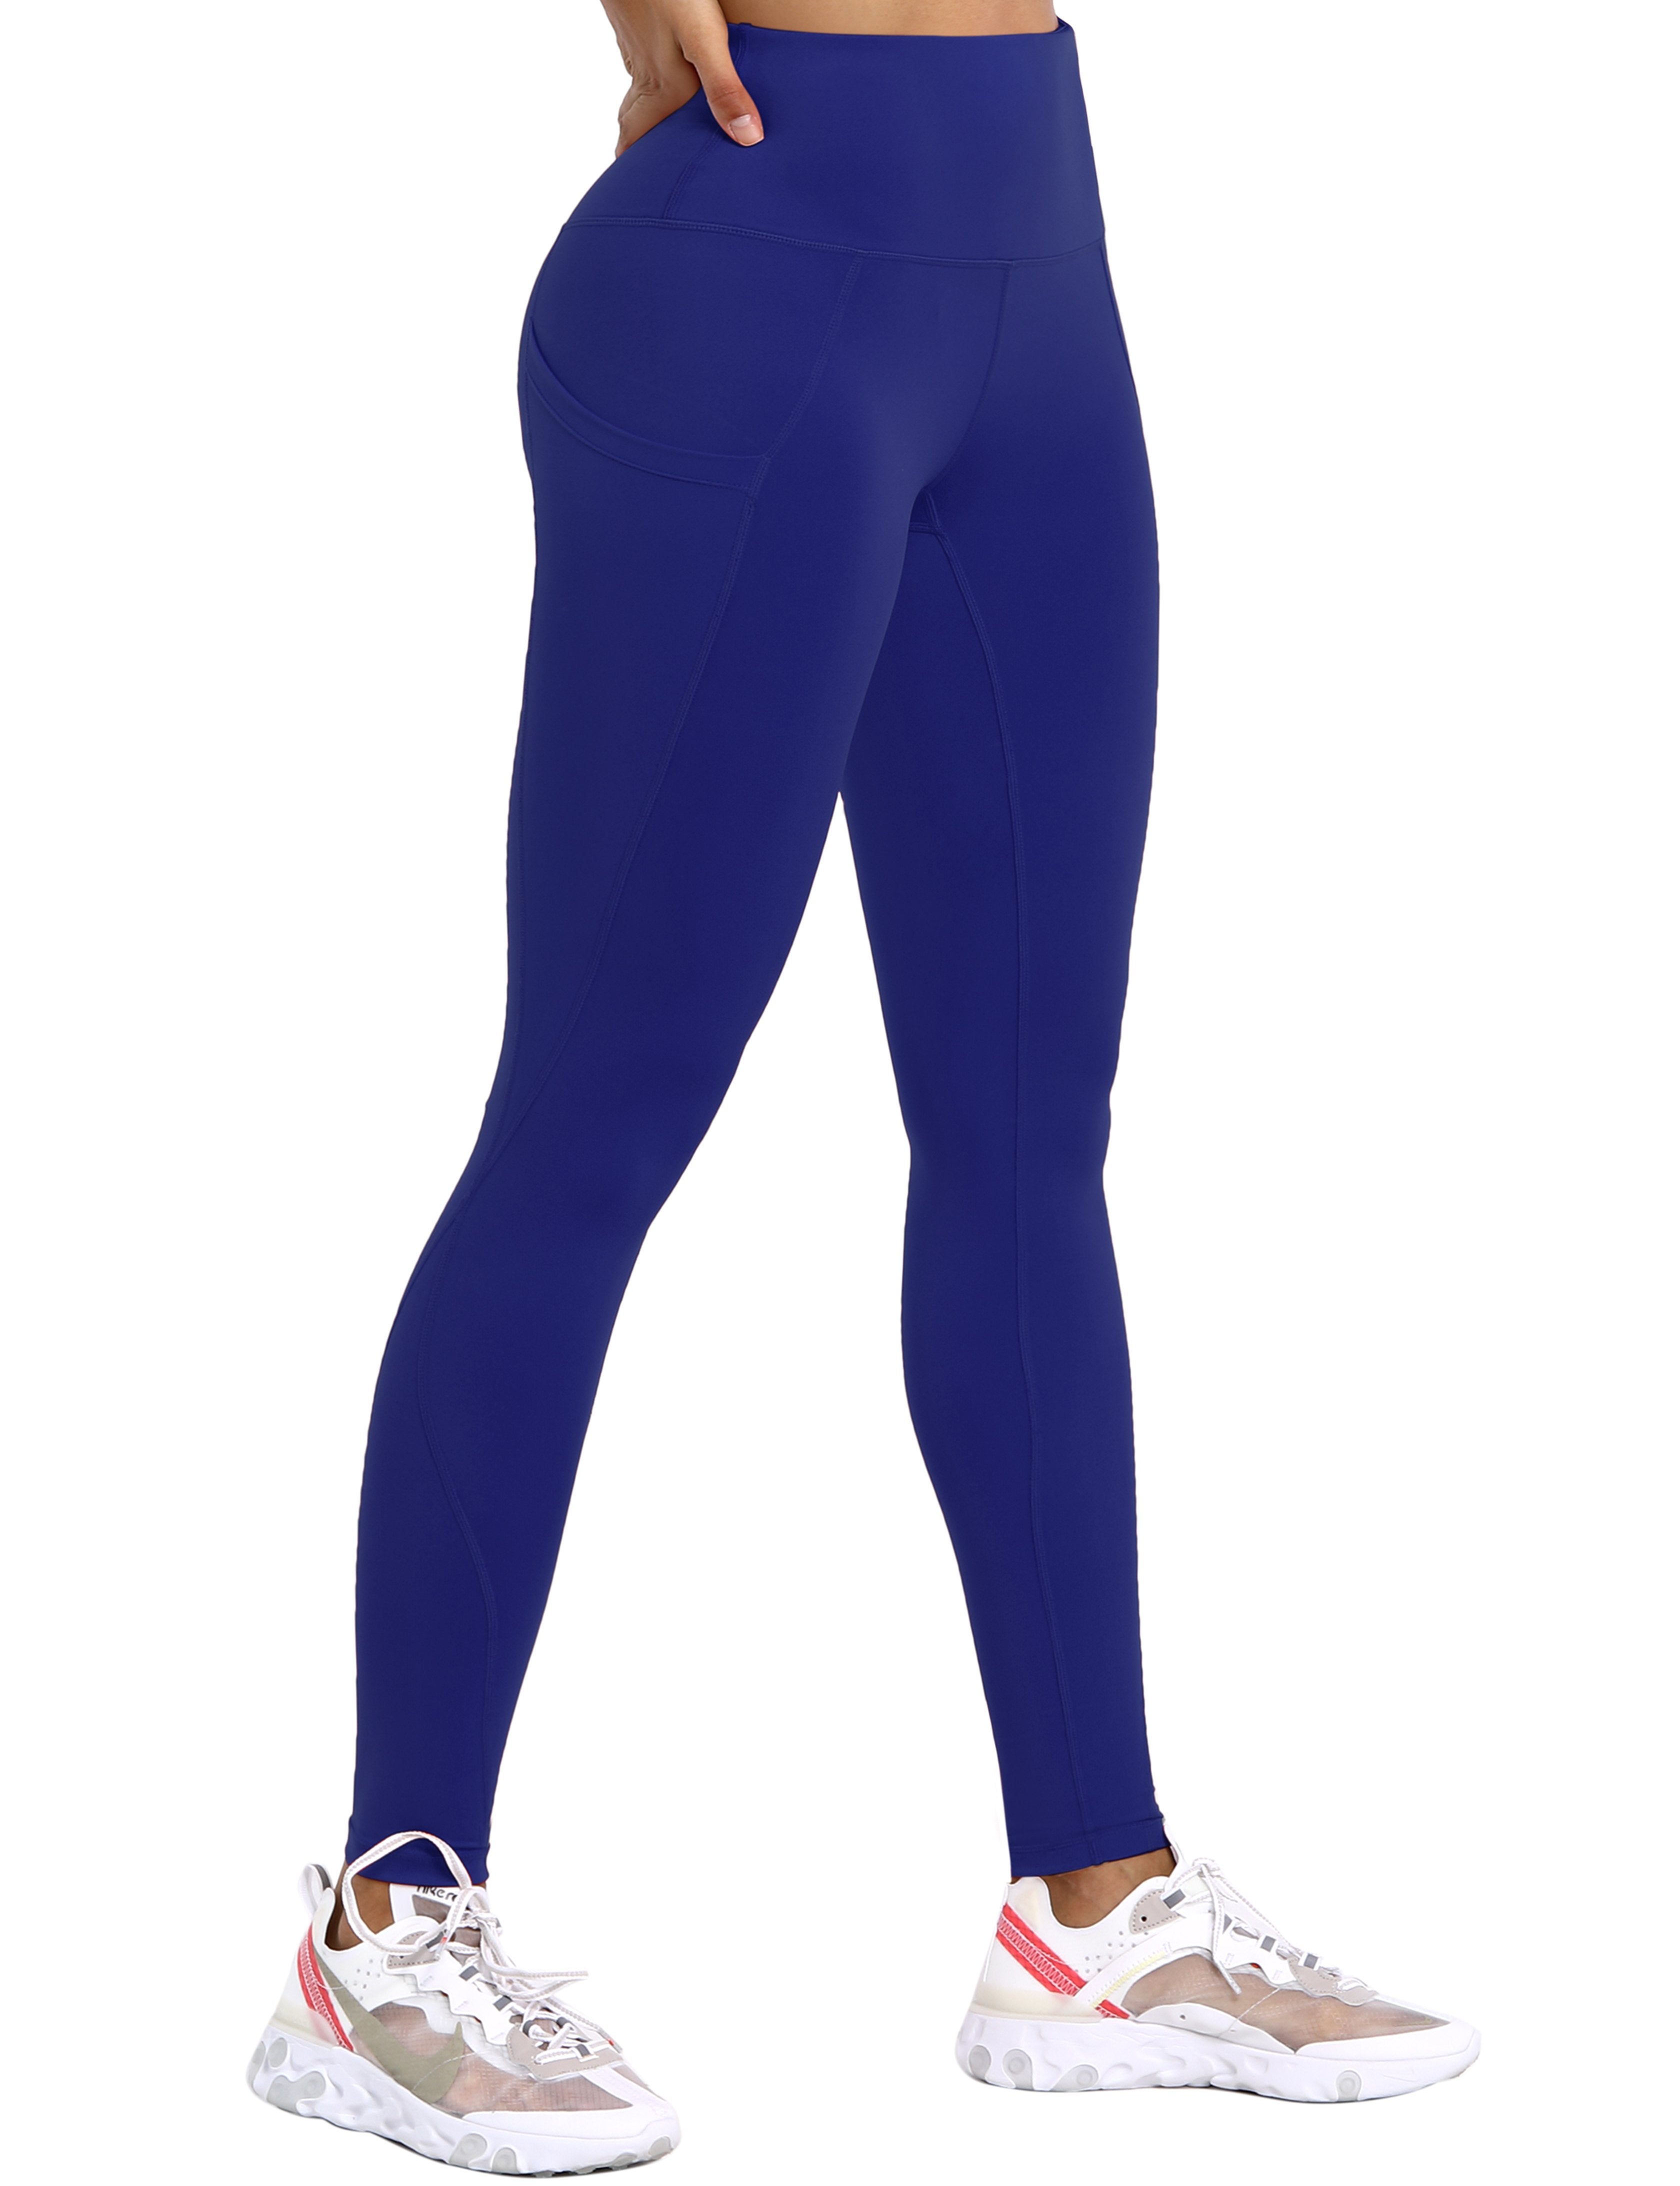 High Waist Side Pockets Jogging Pants navy 75% Nylon, 25% Spandex Fabric doesn't attract lint easily 4-way stretch No see-through Moisture-wicking Tummy control Inner pocket